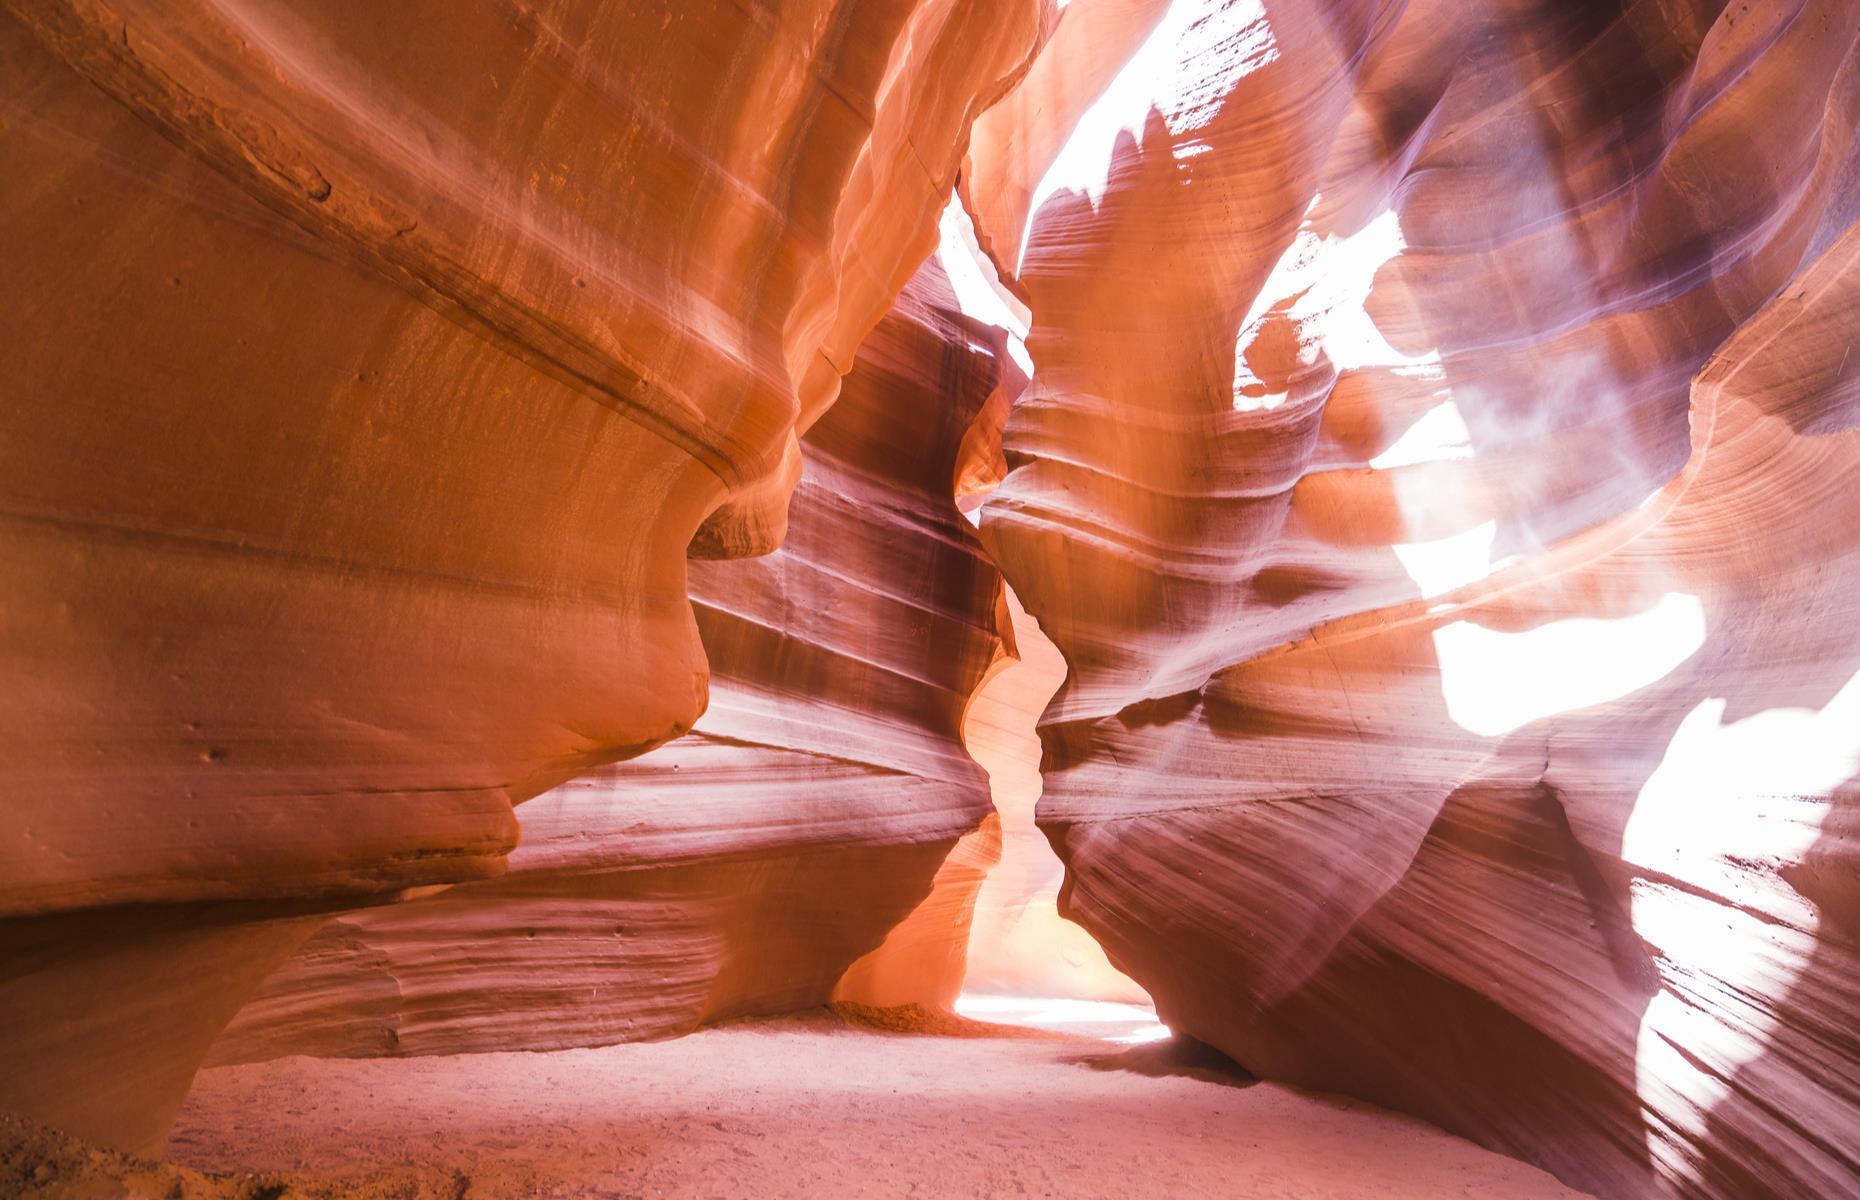 <p>America’s cities and scenery may be spectacular, but have you ever thought about what lies beneath? From labyrinthine caves and hidden towns to subterranean hot springs and even a zipline park, these cool attractions are all tucked away.</p>  <p><strong>Read on to discover the most awe-inspiring underground experiences in the USA...</strong></p>